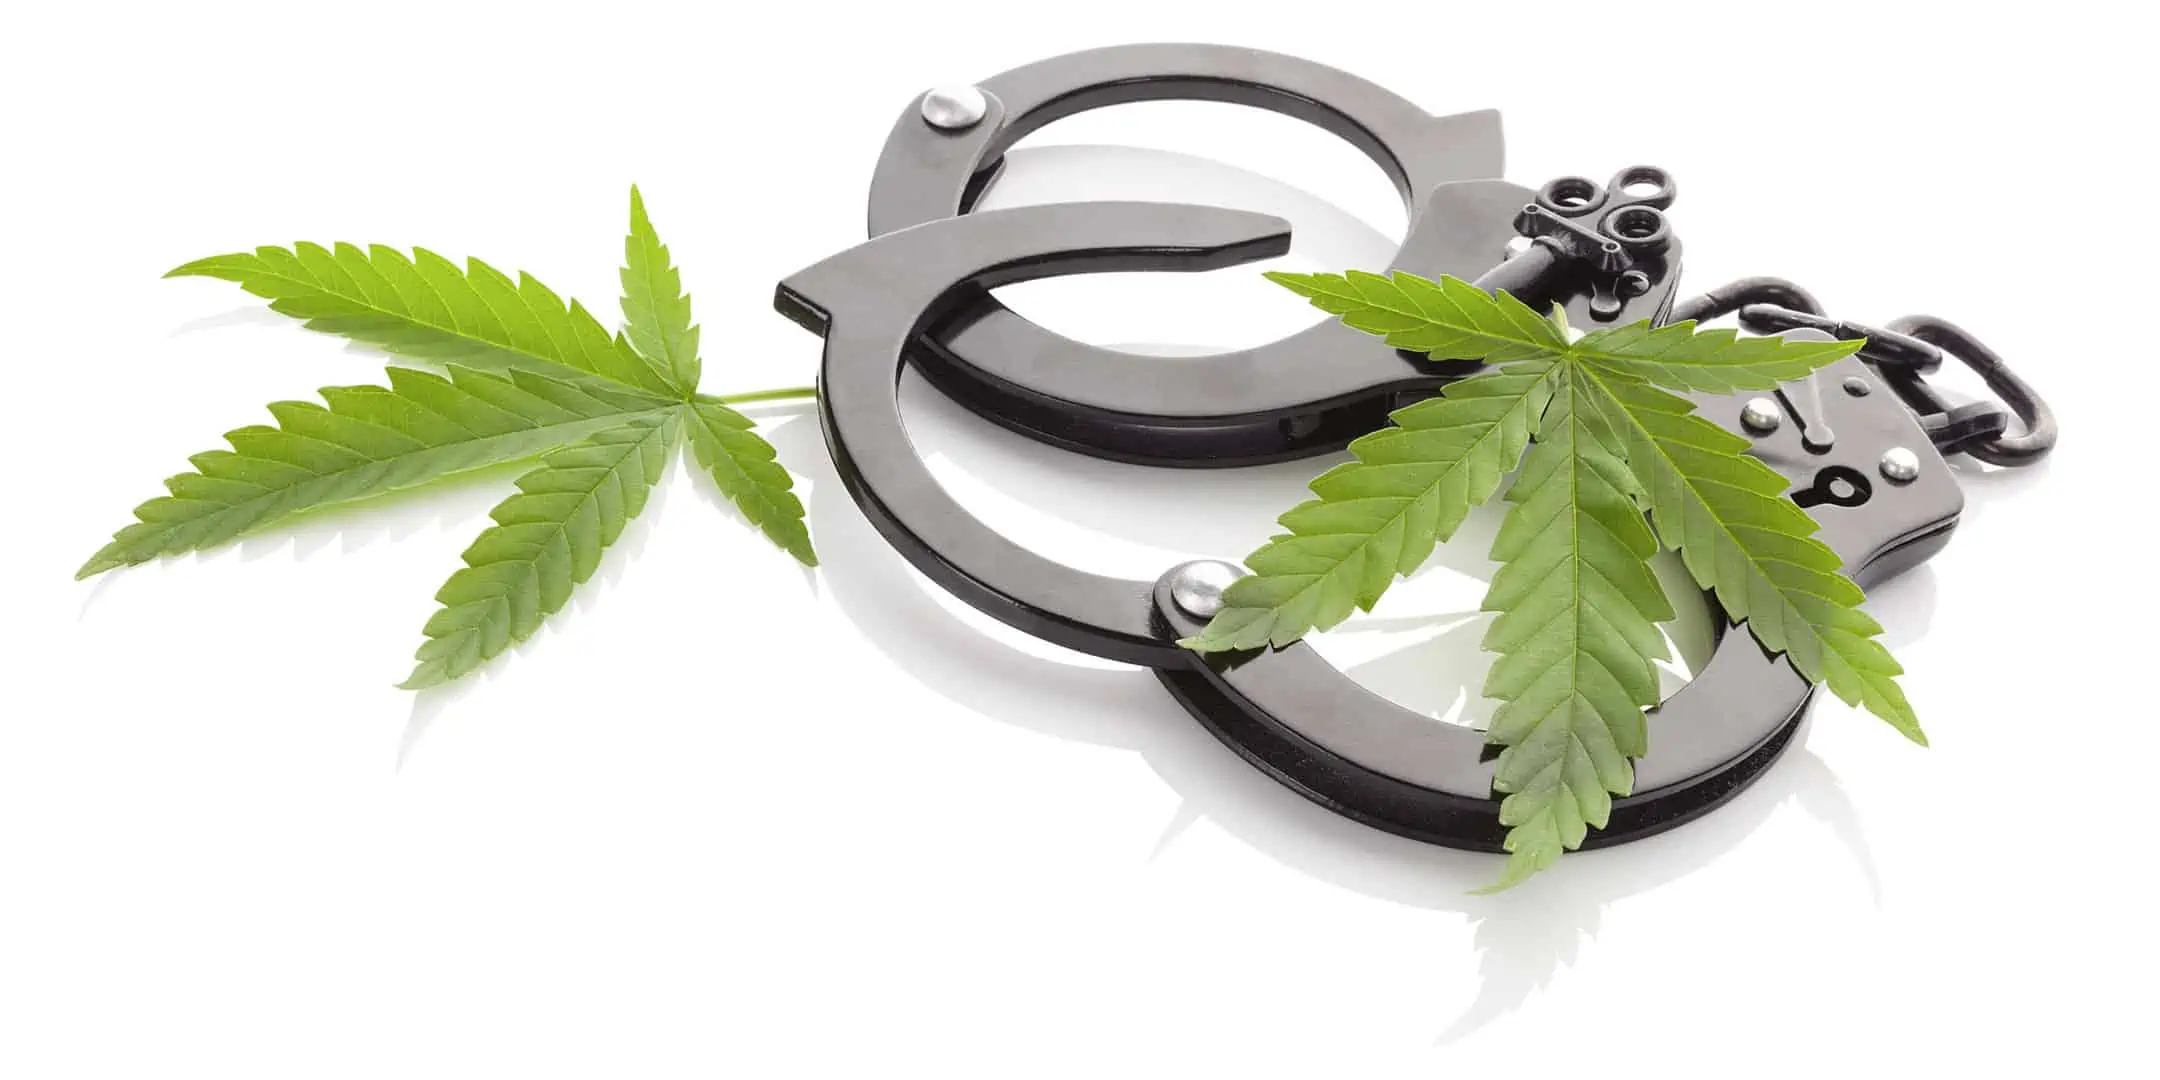 Wondering How to Travel with Medical Marijuana? Your Questions Answered

Hand cuffs